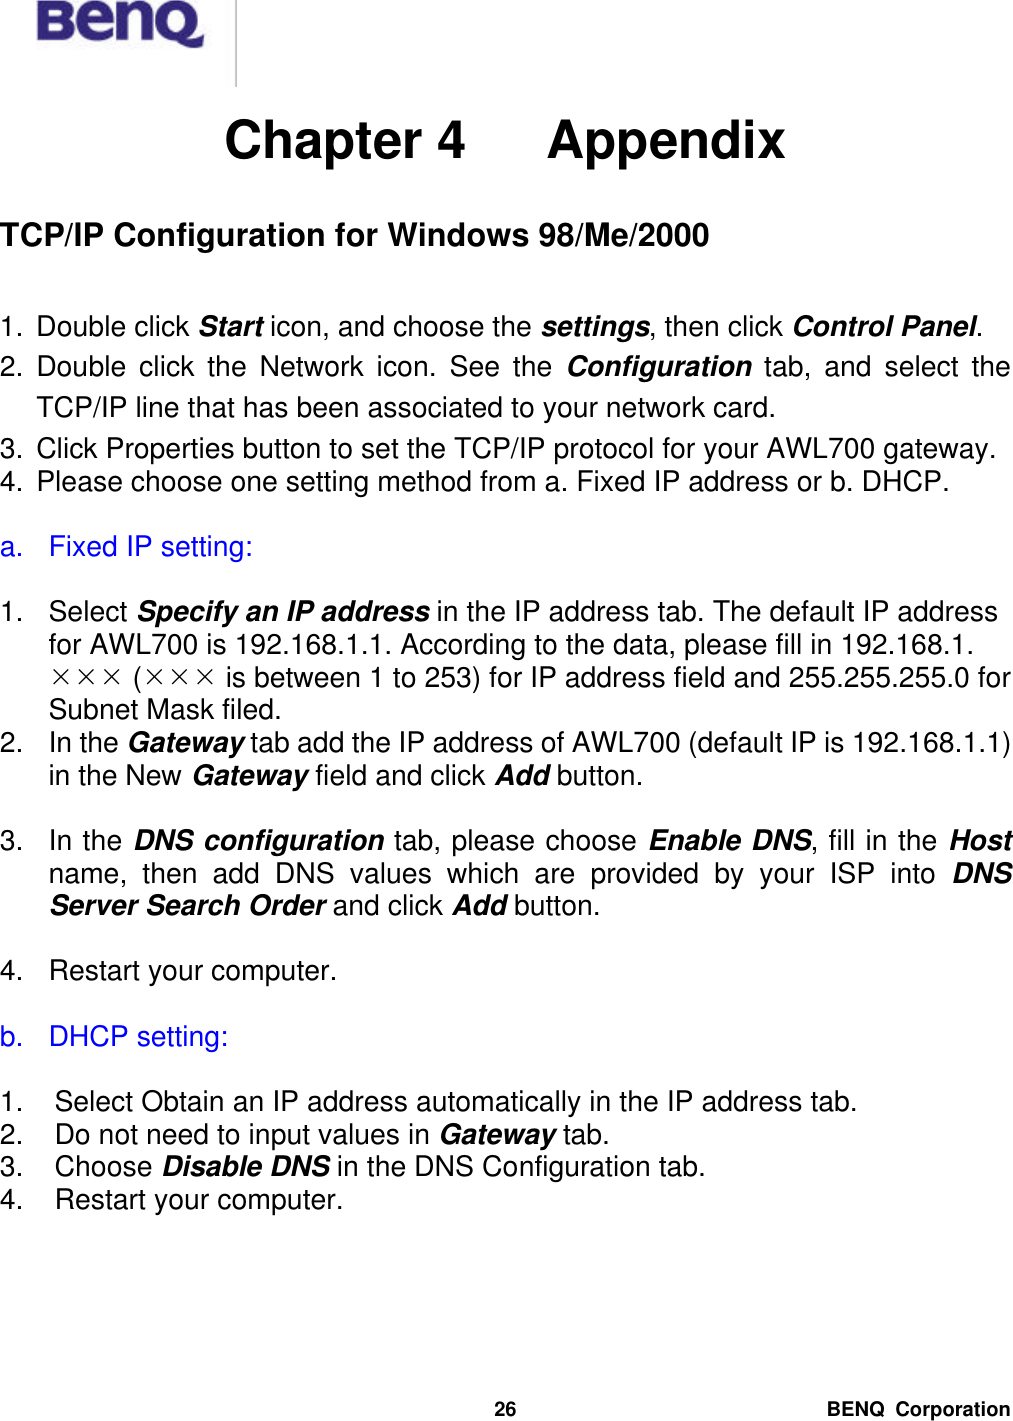  BENQ Corporation 26 Chapter 4   Appendix  TCP/IP Configuration for Windows 98/Me/2000  1. Double click Start icon, and choose the settings, then click Control Panel. 2. Double click the Network icon. See the Configuration tab, and select the TCP/IP line that has been associated to your network card. 3. Click Properties button to set the TCP/IP protocol for your AWL700 gateway. 4. Please choose one setting method from a. Fixed IP address or b. DHCP.  a. Fixed IP setting:  1. Select Specify an IP address in the IP address tab. The default IP address for AWL700 is 192.168.1.1. According to the data, please fill in 192.168.1. ÍÍÍ (ÍÍÍ is between 1 to 253) for IP address field and 255.255.255.0 for Subnet Mask filed. 2. In the Gateway tab add the IP address of AWL700 (default IP is 192.168.1.1) in the New Gateway field and click Add button.  3. In the DNS configuration tab, please choose Enable DNS, fill in the Host name, then add DNS values which are provided by your ISP into DNS Server Search Order and click Add button.  4. Restart your computer.  b. DHCP setting:  1. Select Obtain an IP address automatically in the IP address tab. 2. Do not need to input values in Gateway tab. 3. Choose Disable DNS in the DNS Configuration tab. 4. Restart your computer. 